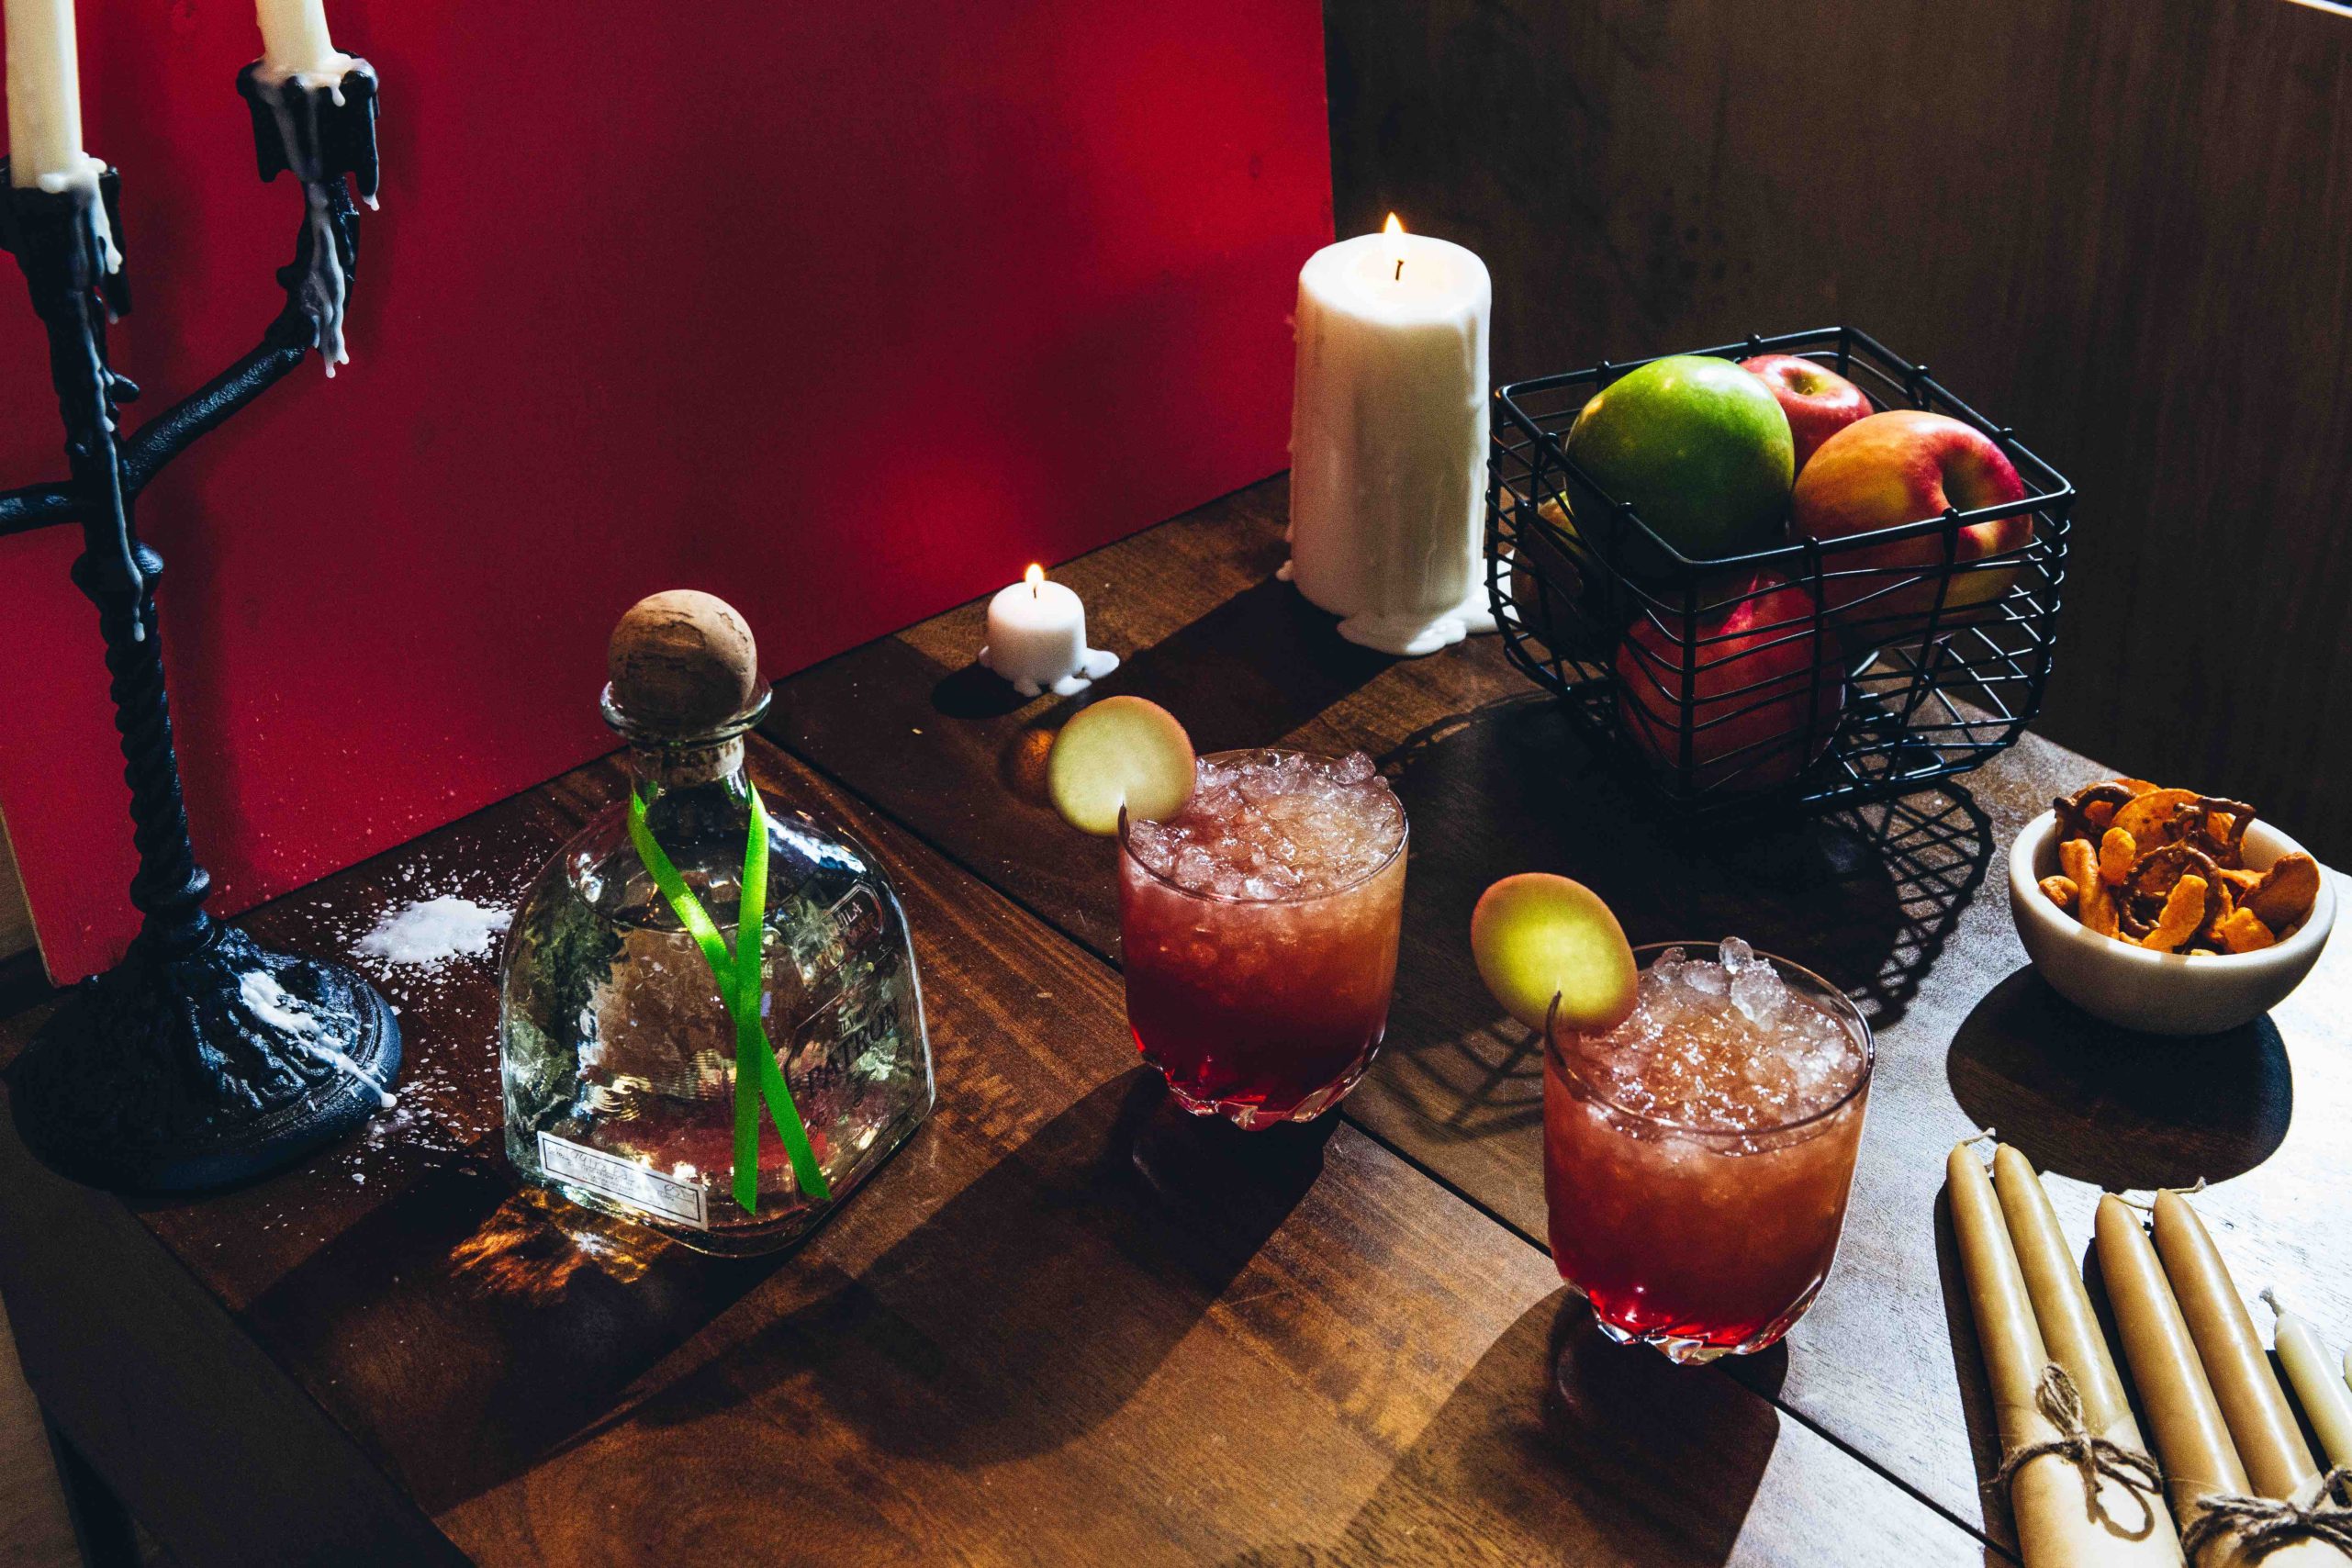 Take Your Día de los Muertos, or Day of the Dead Celebration Up A Notch With These Delicious Tequila Cocktails